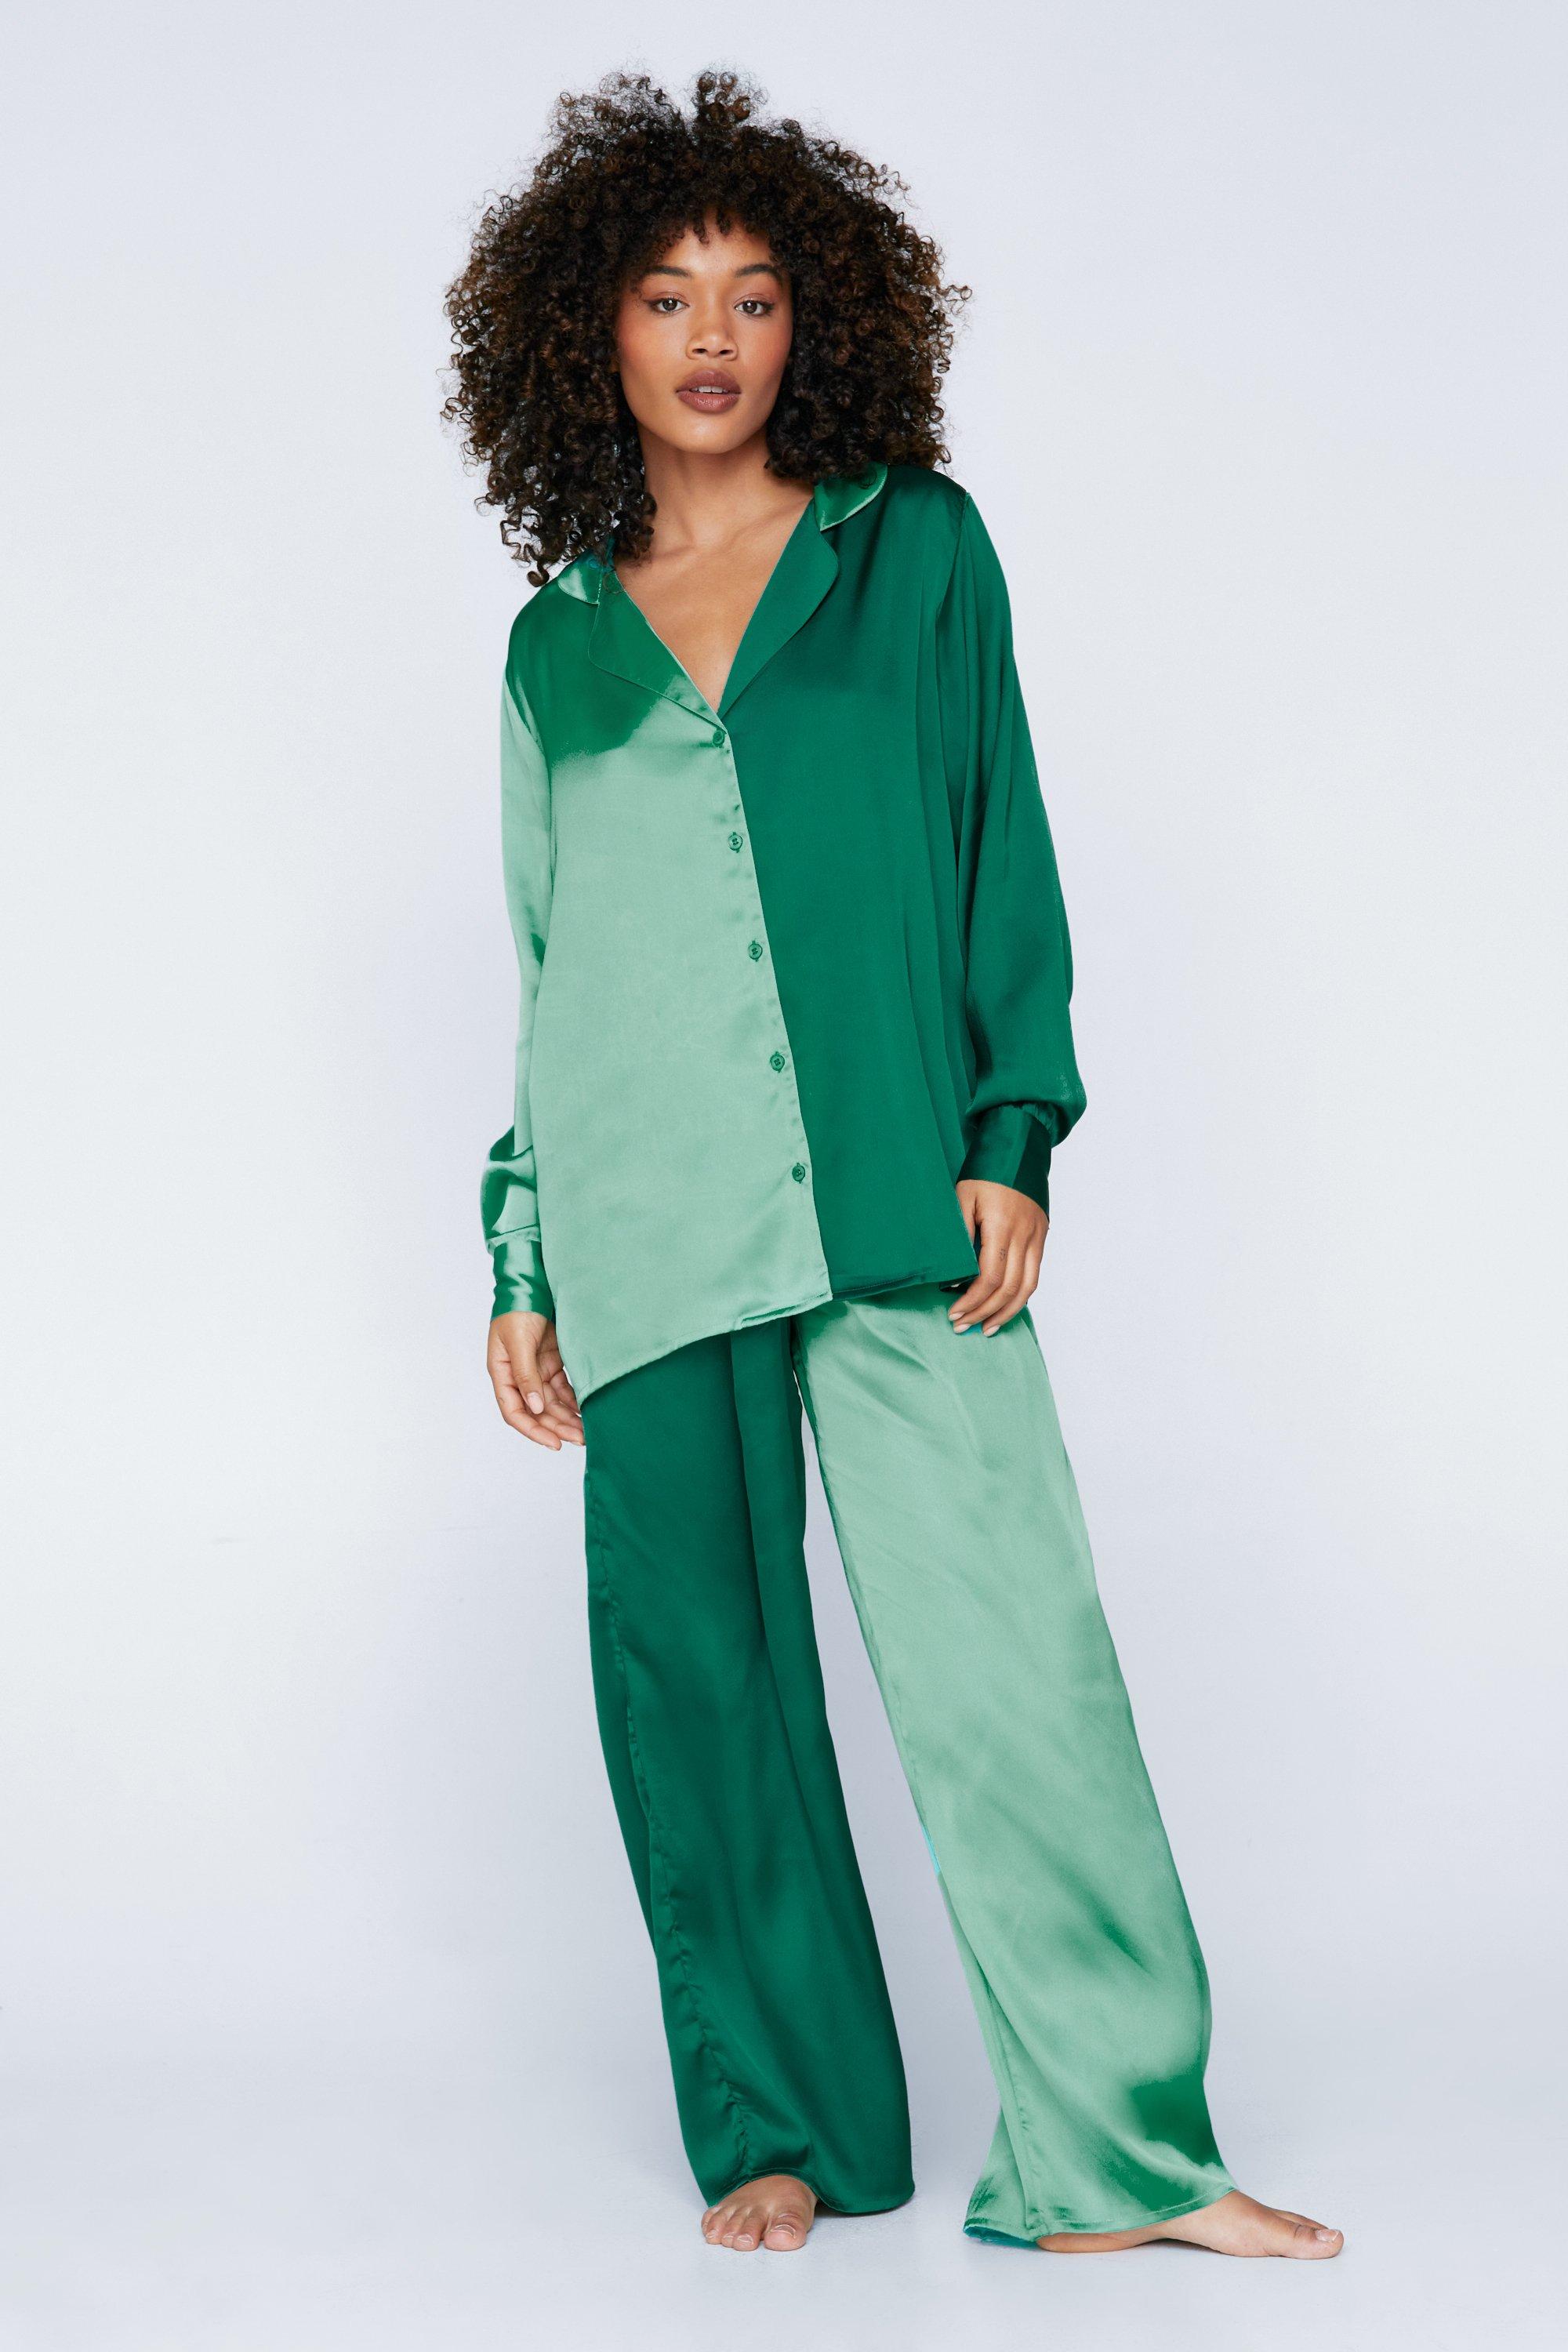 ZRWLUCKY Green Solid Color Pure Plain Women's Pajama Pants Pj